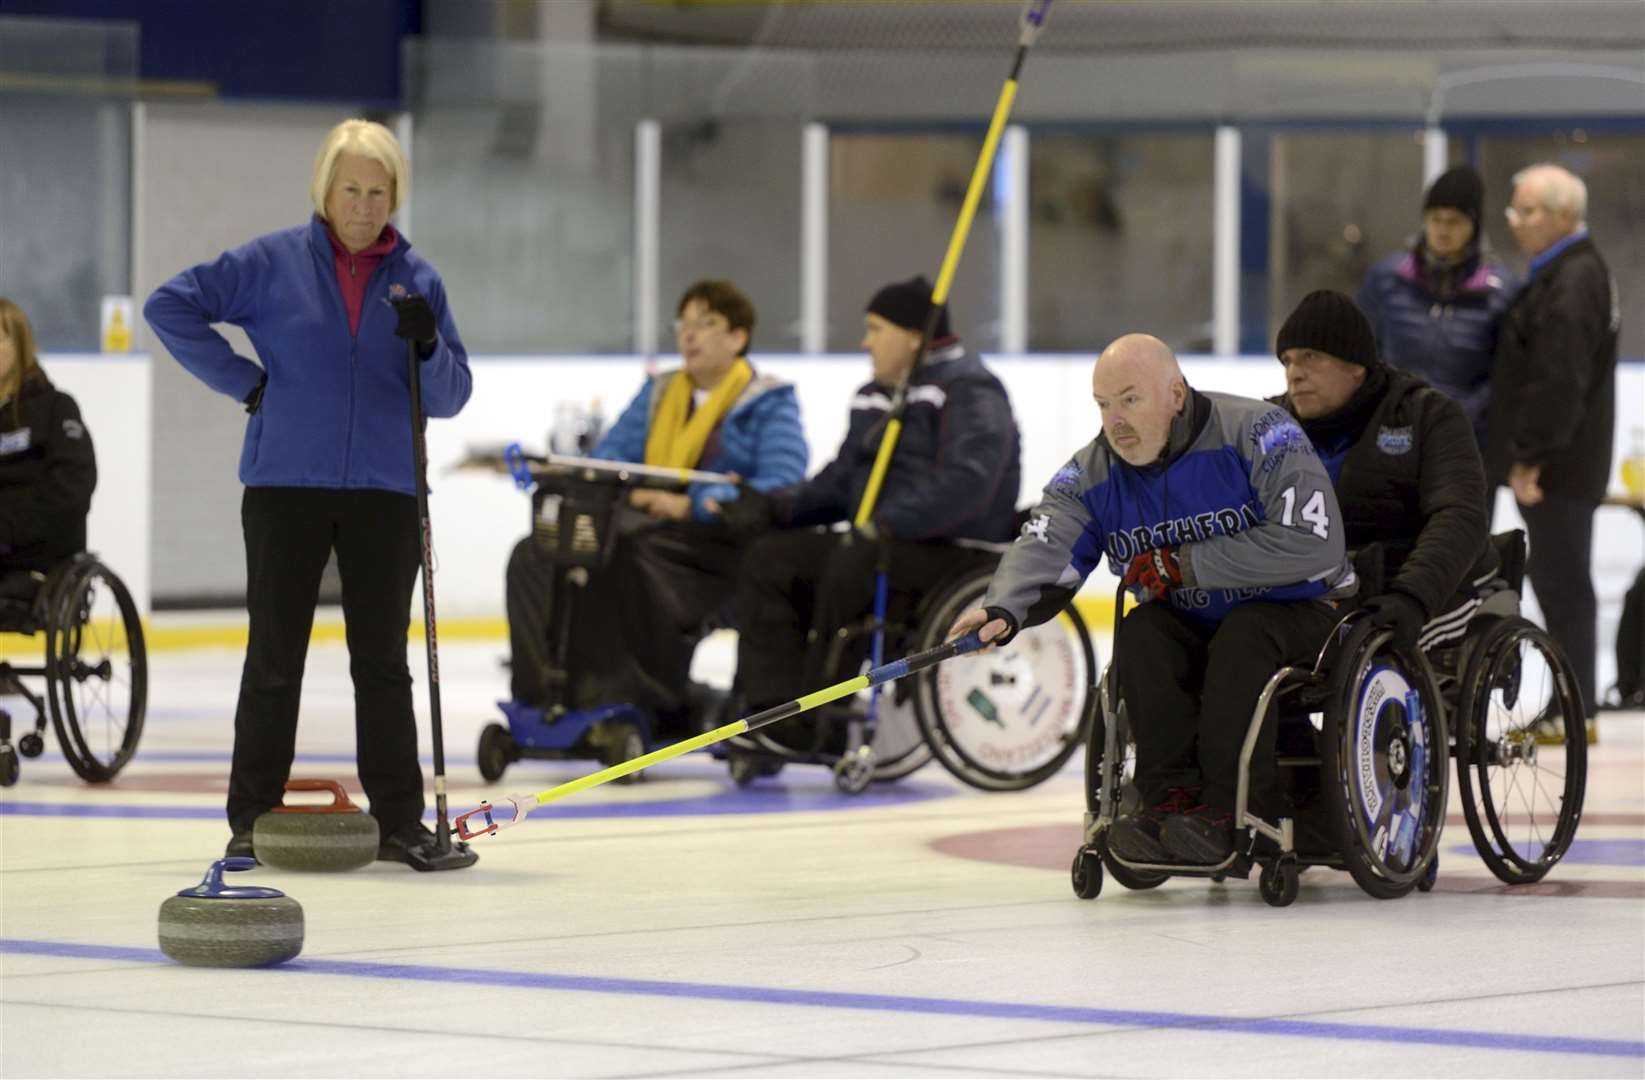 Highland Wheelchair Curling Triples Competition was last held in 2019.